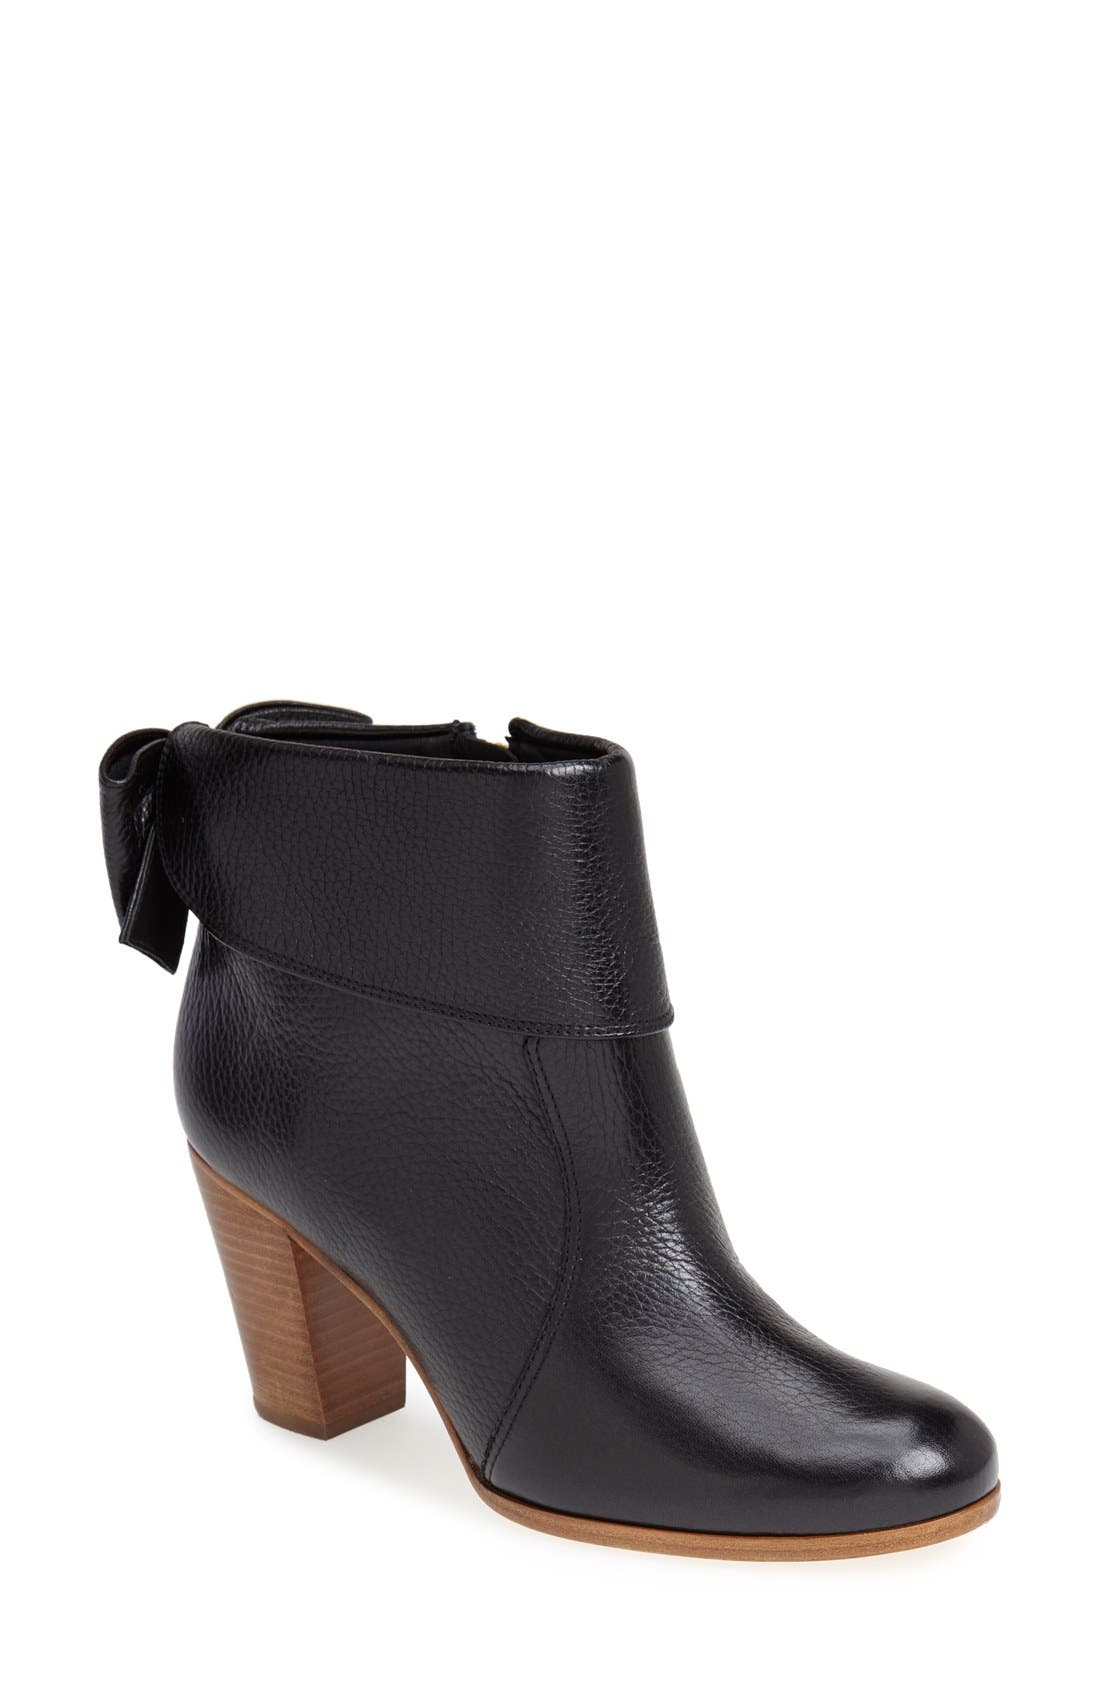 kate spade bow boots